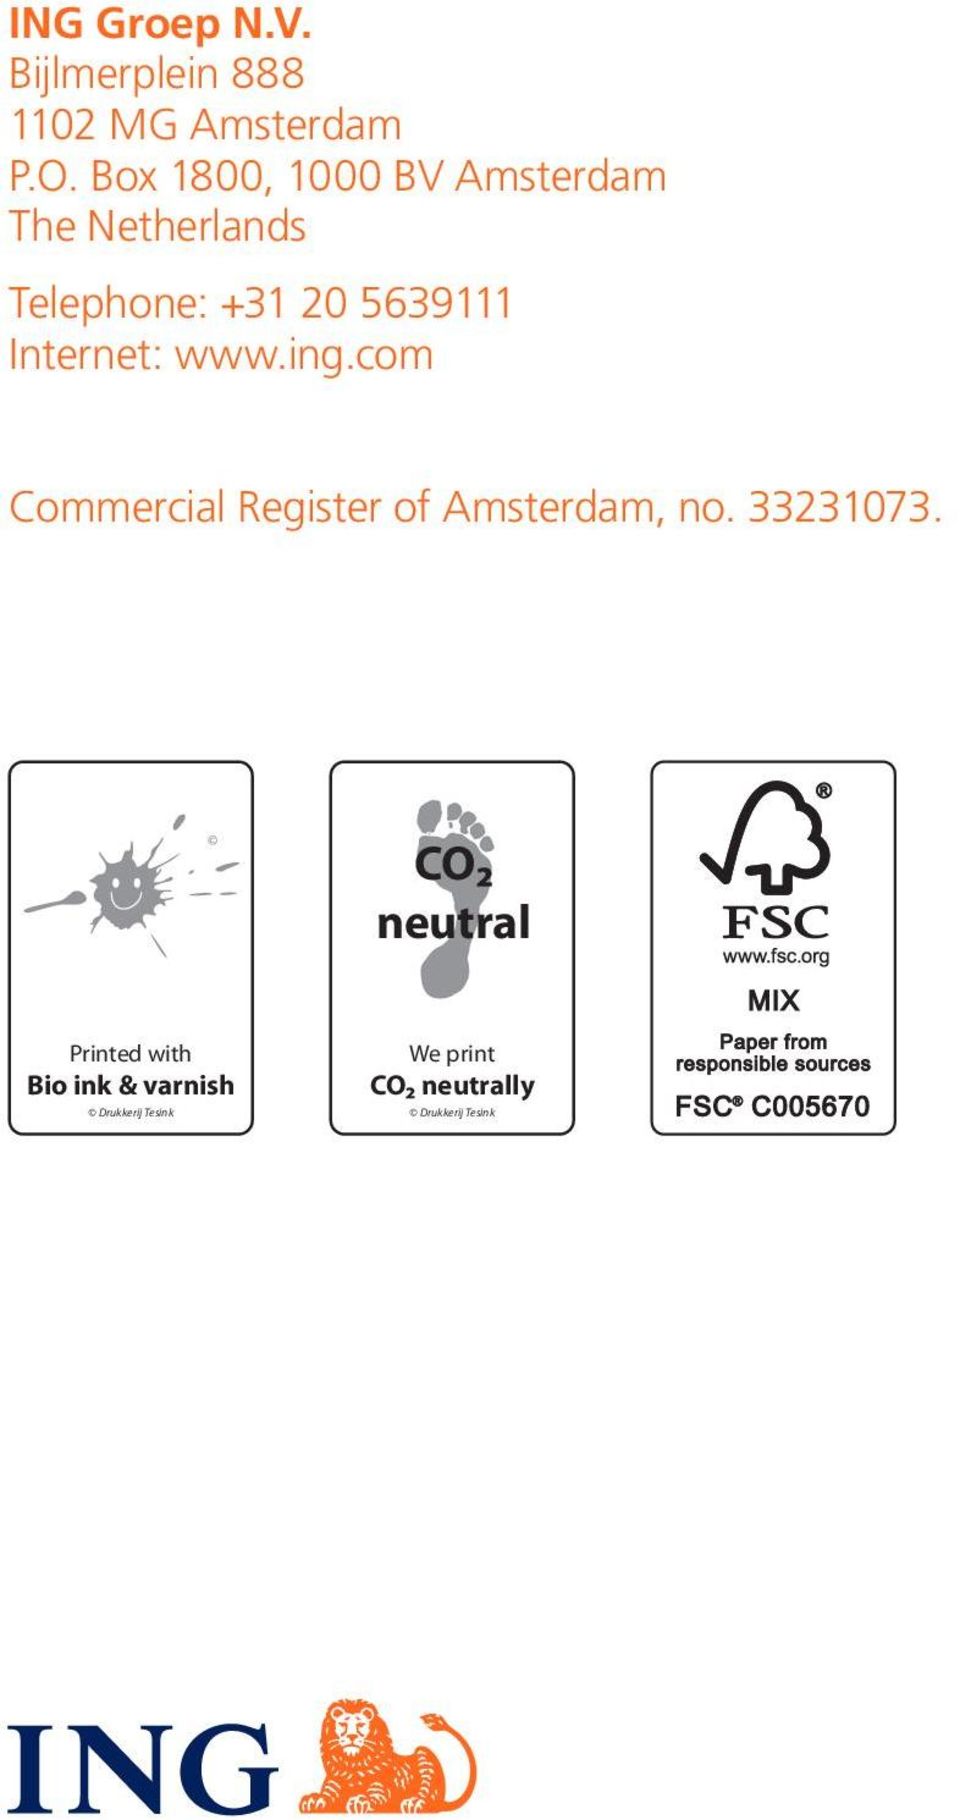 Internet: www.ing.com Commercial Register of Amsterdam, no. 33231073.